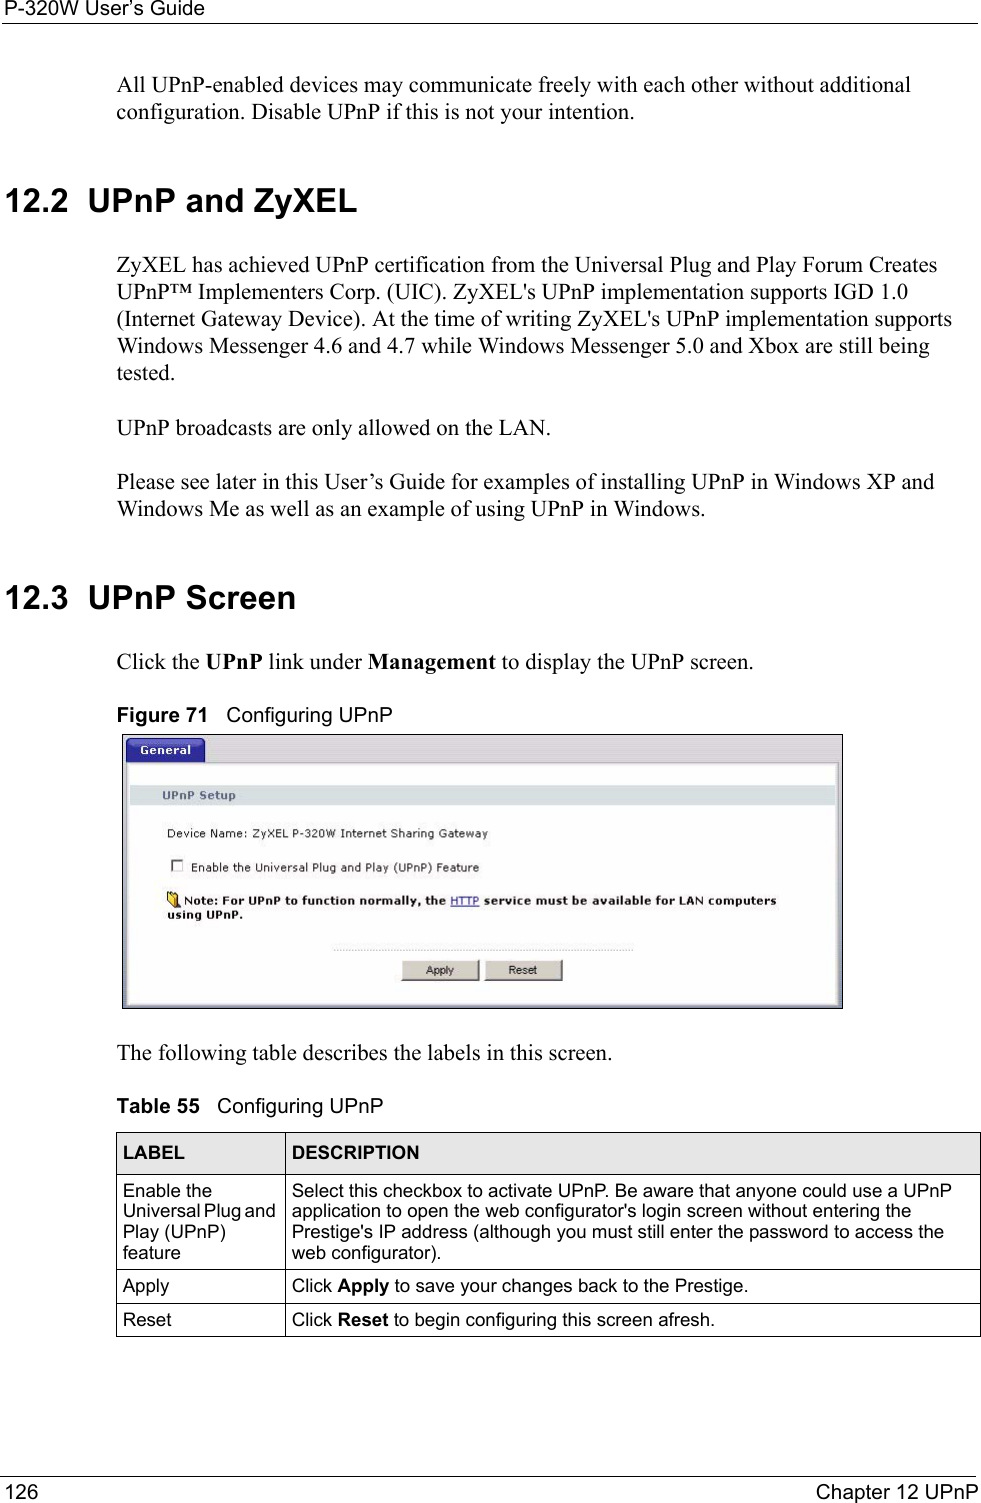 P-320W User’s Guide126  Chapter 12 UPnPAll UPnP-enabled devices may communicate freely with each other without additional configuration. Disable UPnP if this is not your intention. 12.2  UPnP and ZyXELZyXEL has achieved UPnP certification from the Universal Plug and Play Forum Creates UPnP™ Implementers Corp. (UIC). ZyXEL&apos;s UPnP implementation supports IGD 1.0 (Internet Gateway Device). At the time of writing ZyXEL&apos;s UPnP implementation supports Windows Messenger 4.6 and 4.7 while Windows Messenger 5.0 and Xbox are still being tested.UPnP broadcasts are only allowed on the LAN.Please see later in this User’s Guide for examples of installing UPnP in Windows XP and Windows Me as well as an example of using UPnP in Windows.12.3  UPnP ScreenClick the UPnP link under Management to display the UPnP screen.Figure 71   Configuring UPnPThe following table describes the labels in this screen.Table 55   Configuring UPnPLABEL DESCRIPTIONEnable the Universal Plug and Play (UPnP) feature Select this checkbox to activate UPnP. Be aware that anyone could use a UPnP application to open the web configurator&apos;s login screen without entering the Prestige&apos;s IP address (although you must still enter the password to access the web configurator).Apply Click Apply to save your changes back to the Prestige.Reset Click Reset to begin configuring this screen afresh.